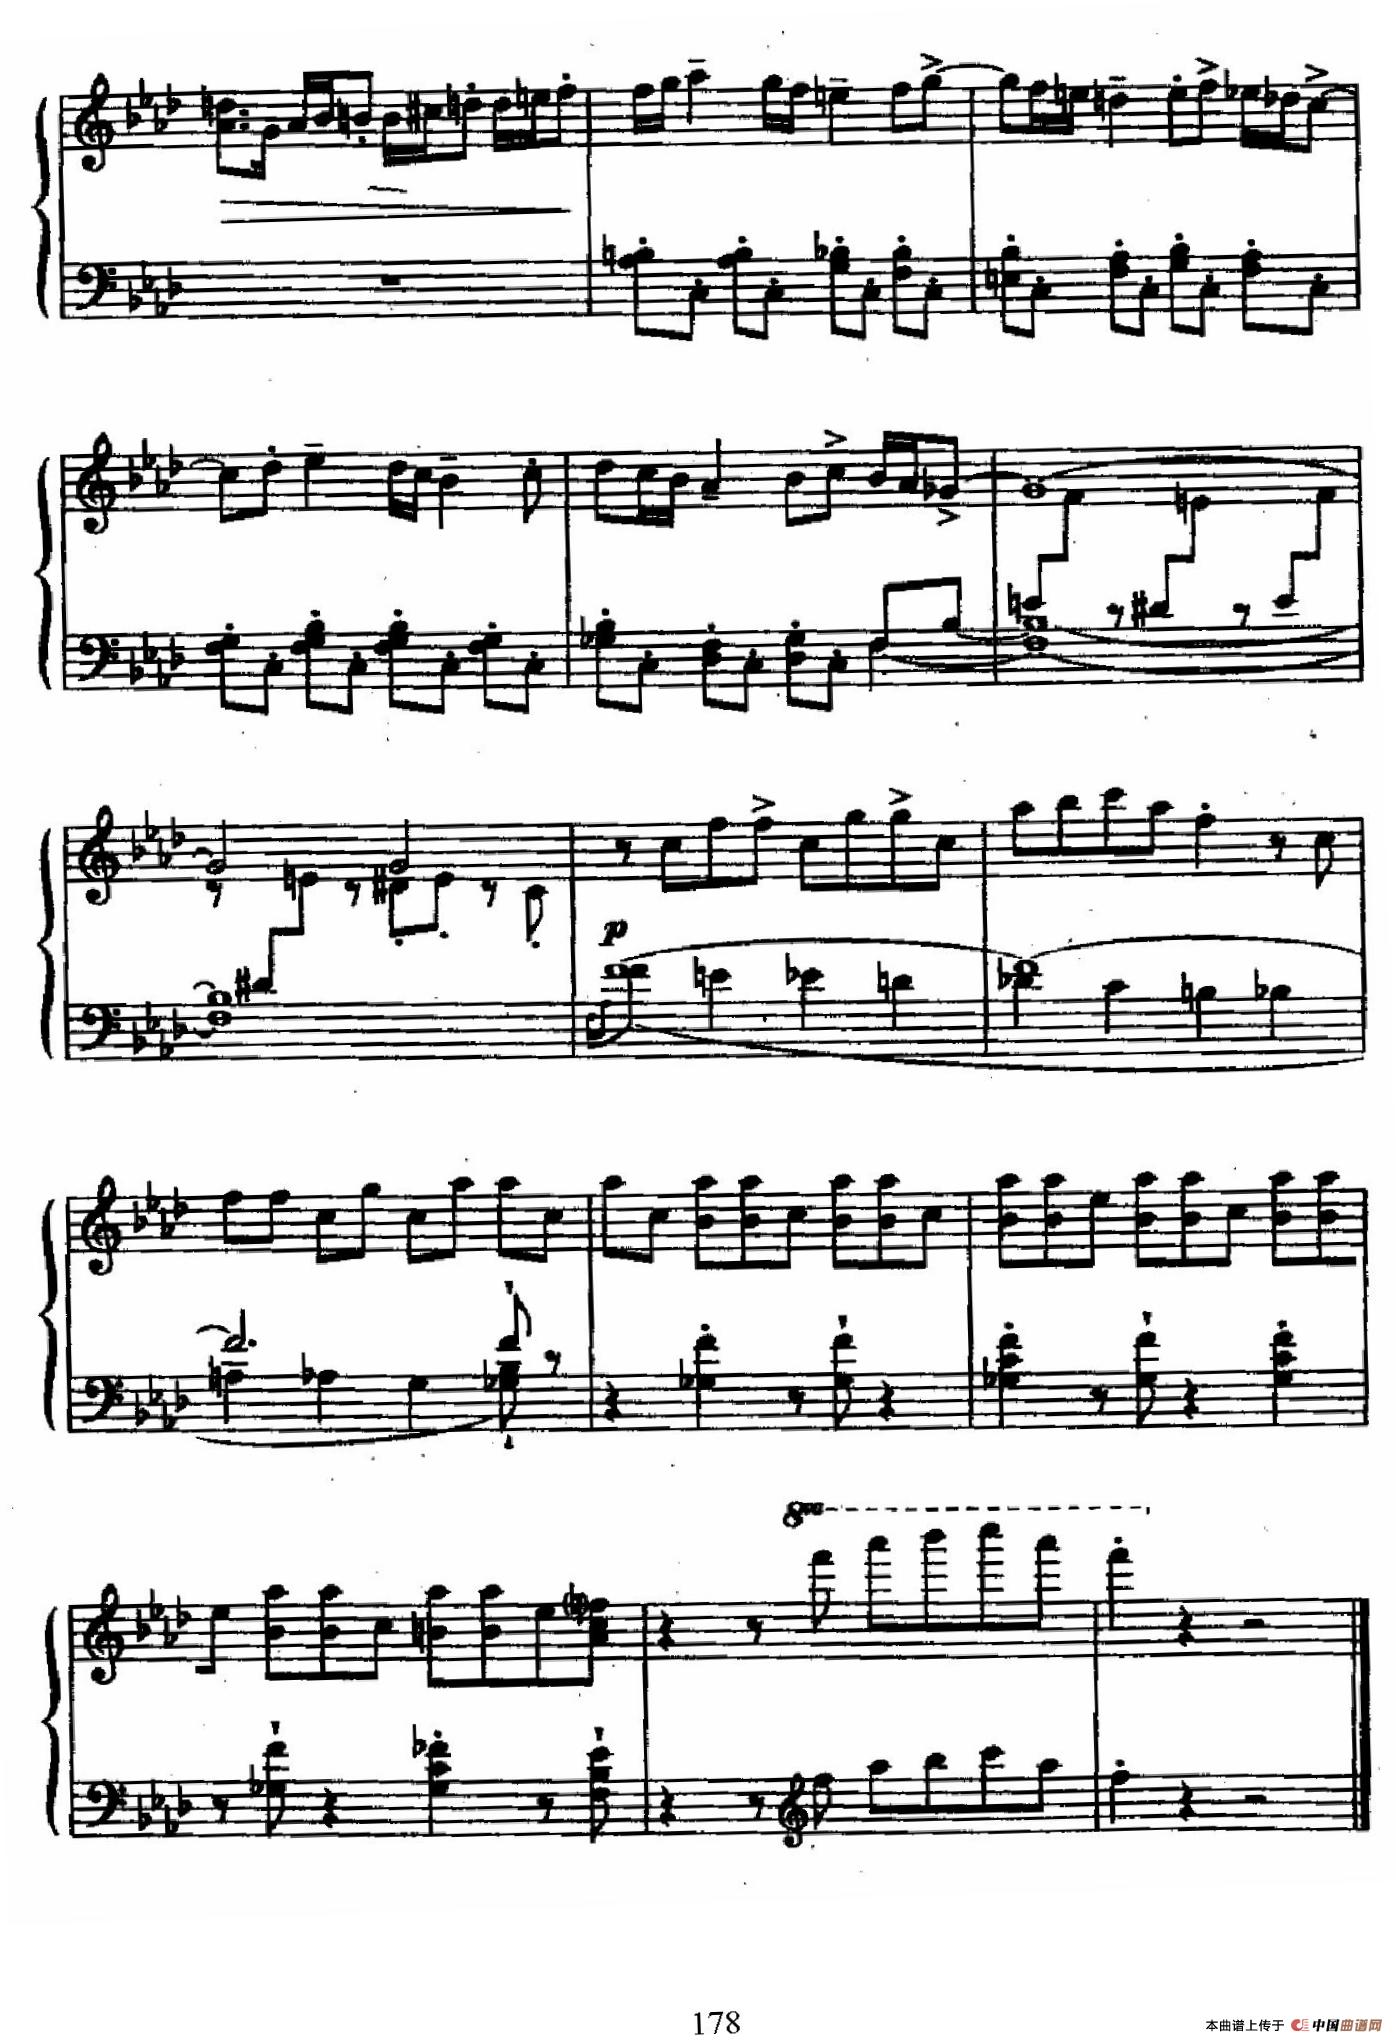 24 Preludes and Fugues Op.82（24首前奏曲与赋格·20）